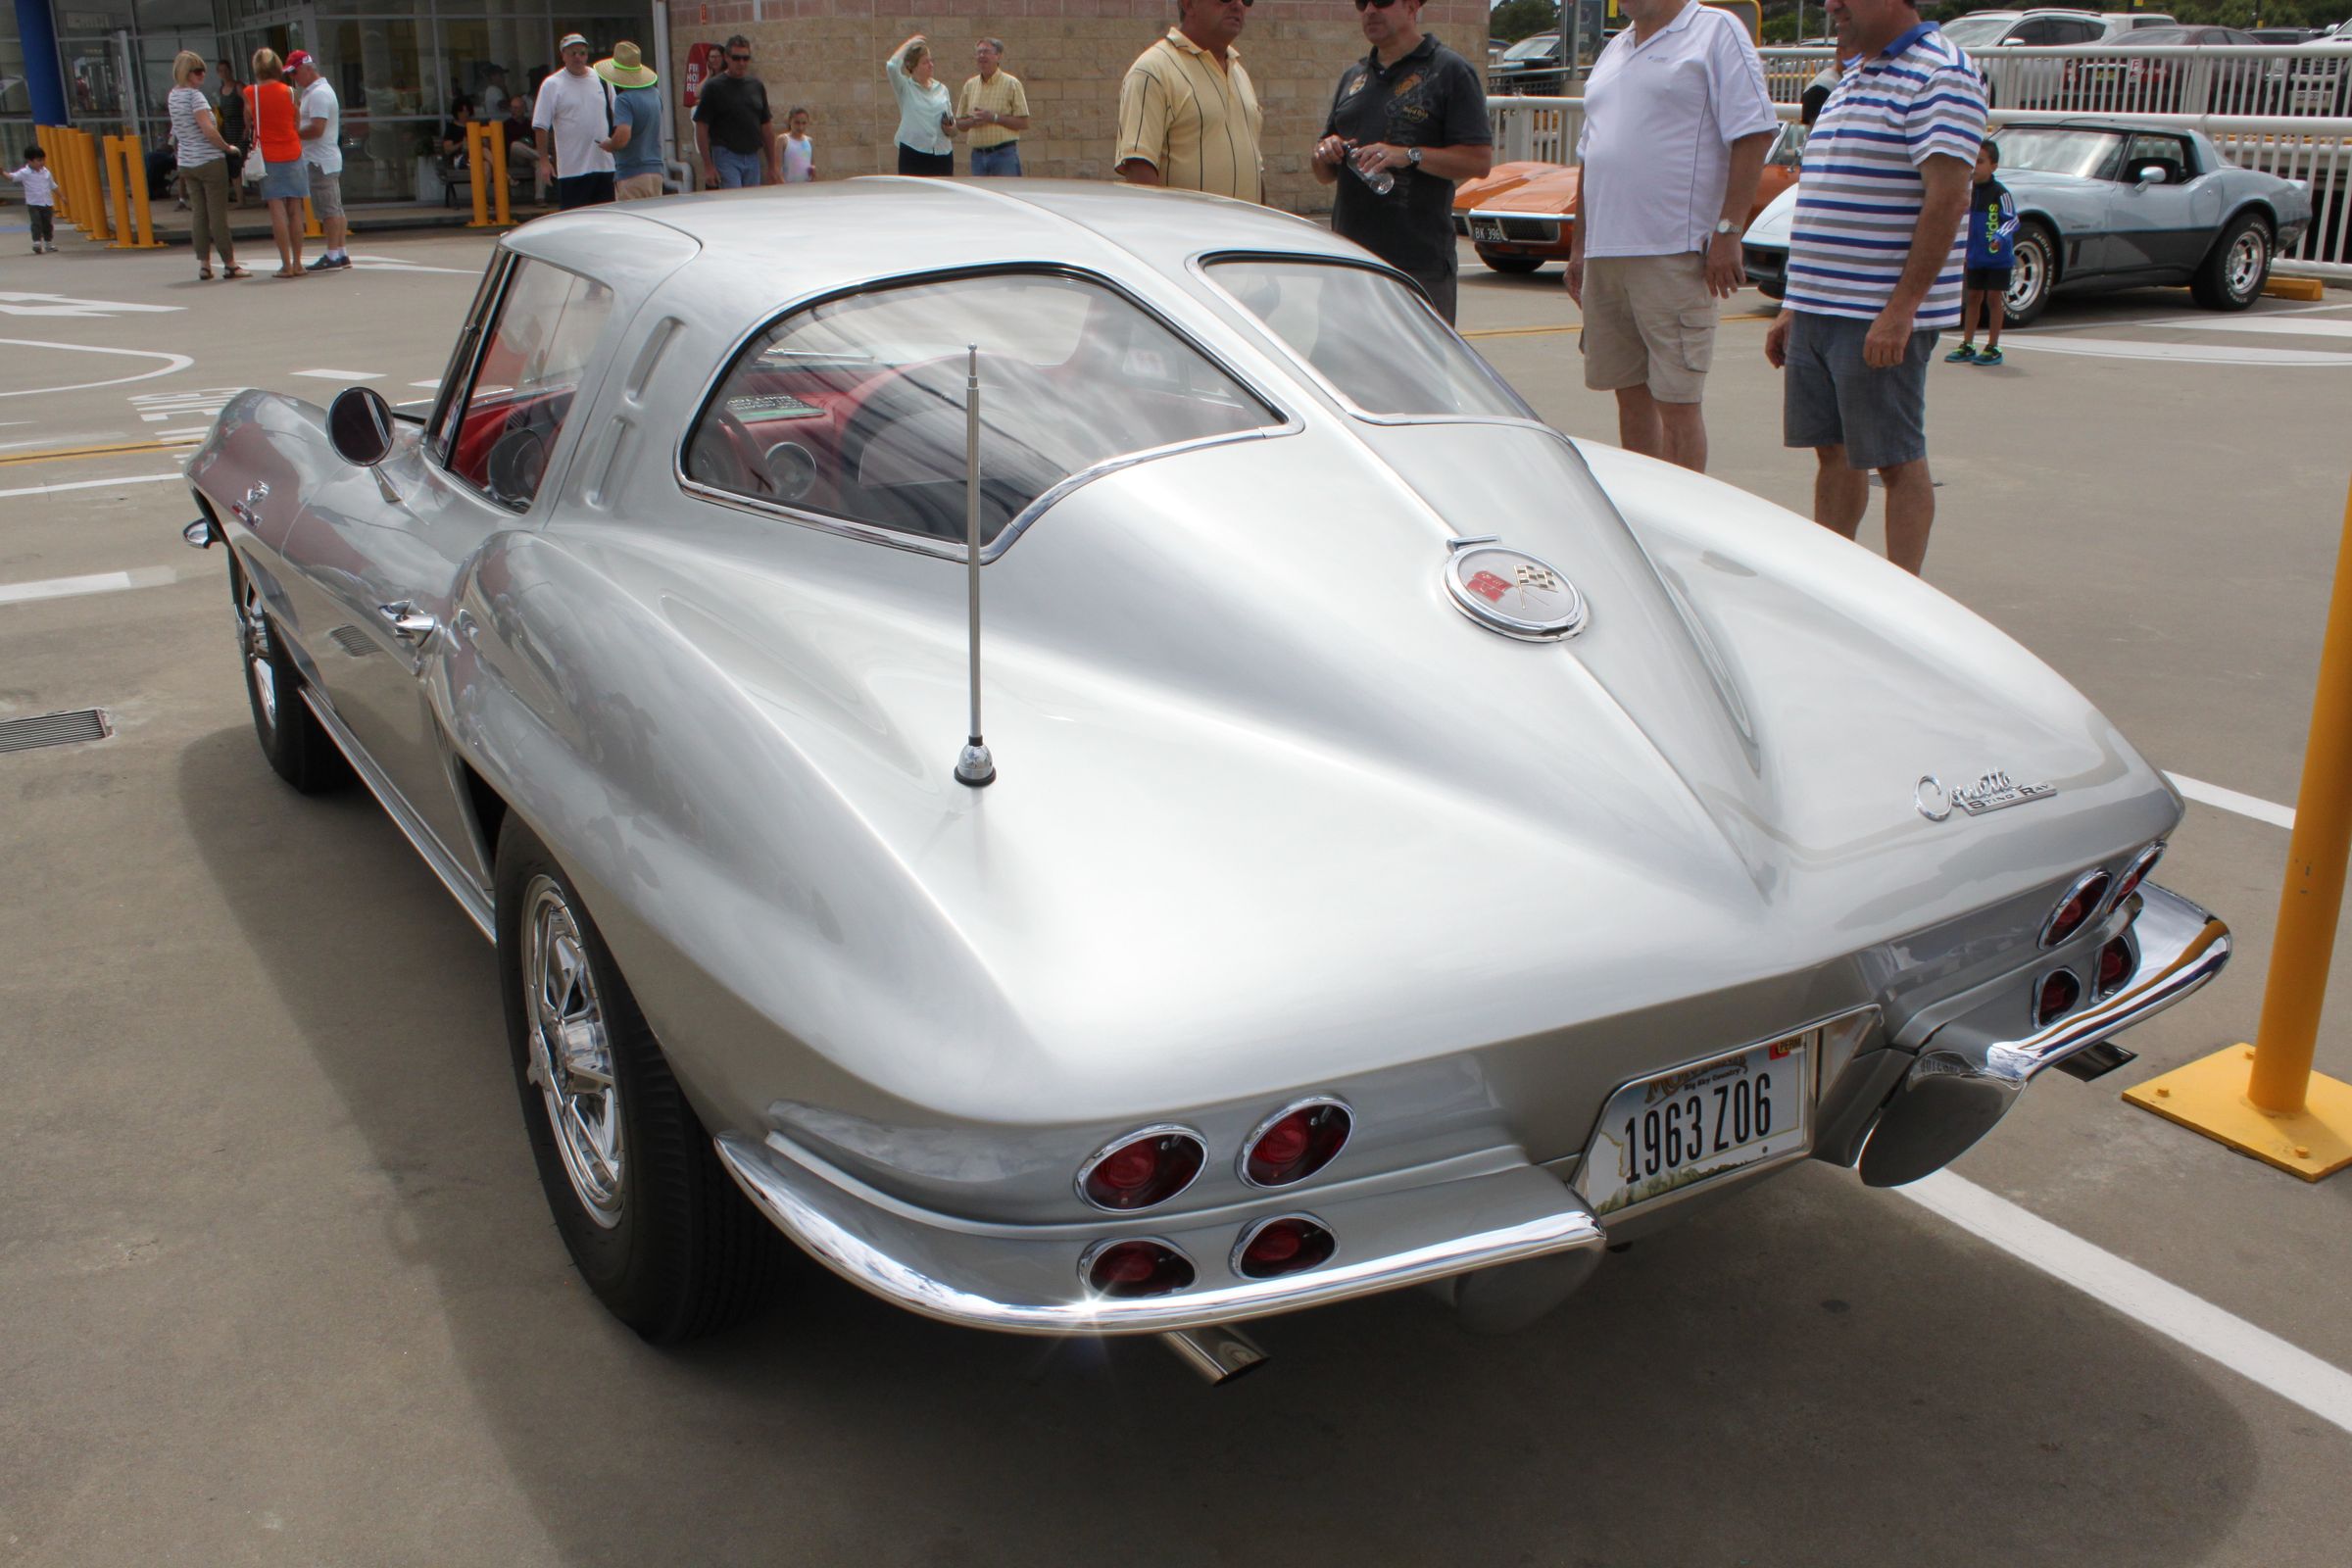 news, sports, american, newsletter, highlights, muscle, handpicked, client, classic, modern classic, europe, features, luxury, trucks, celebrity, off-road, german, unveiling the icon: the most famous chevy corvette